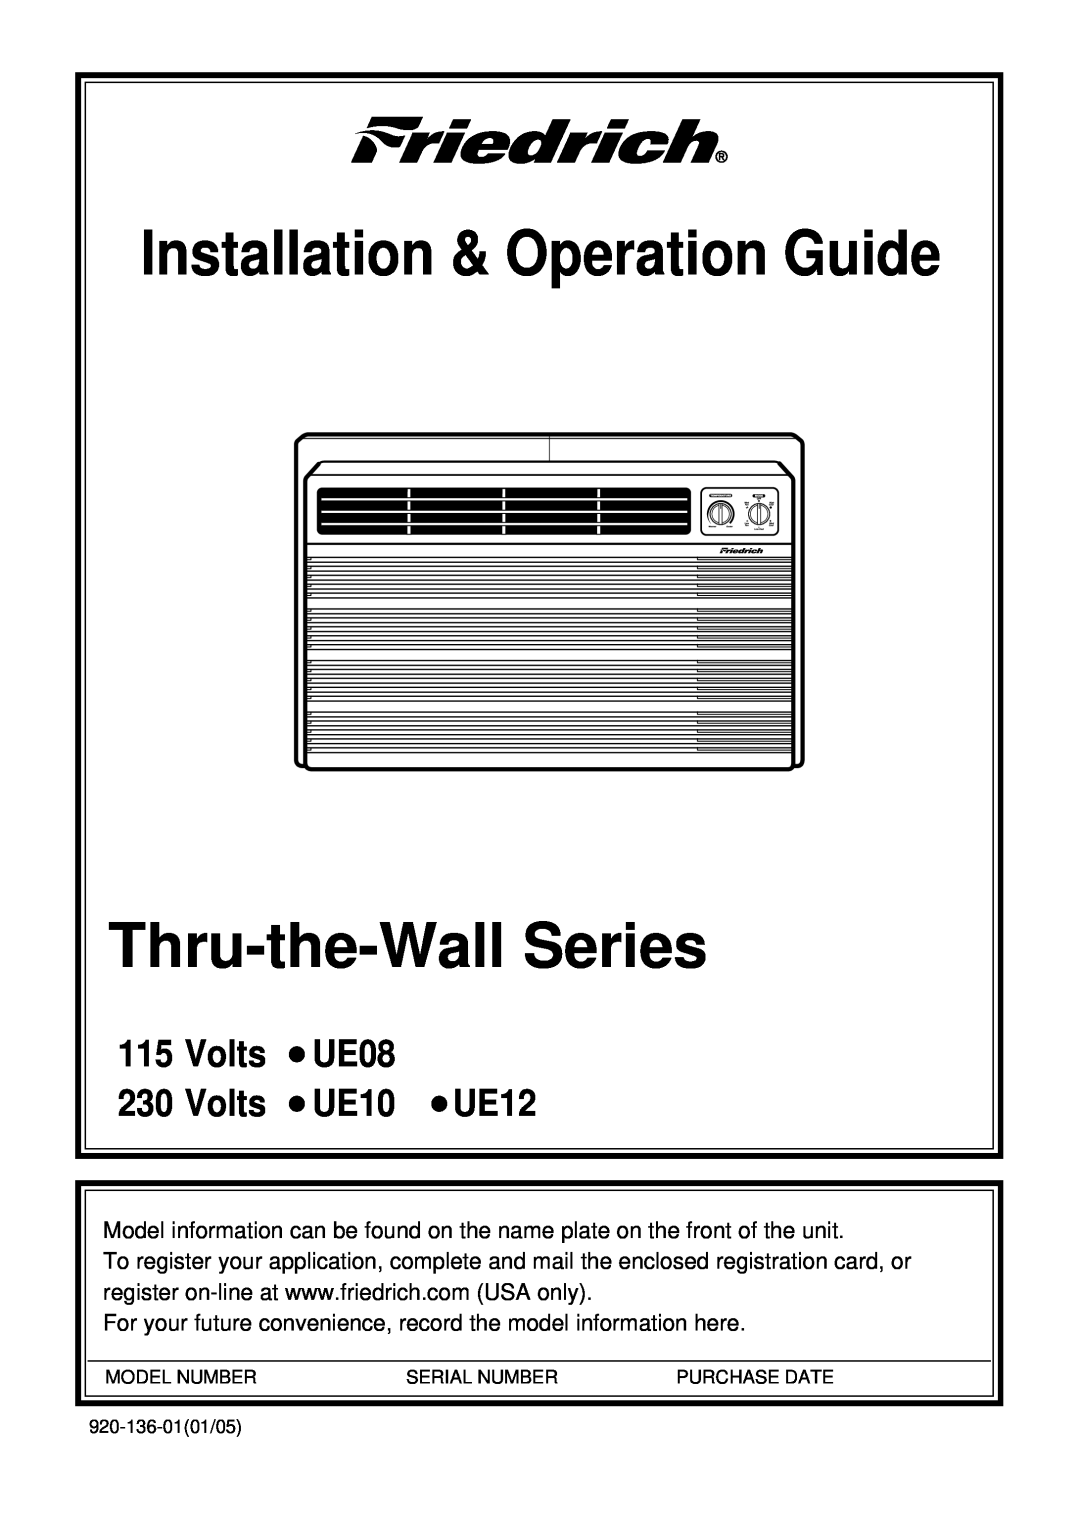 Friedrich UE12 manual Thru-the-WallSeries, Service and Parts Manual, 230VoltsUE10:Staring with serial number LGDK00001 